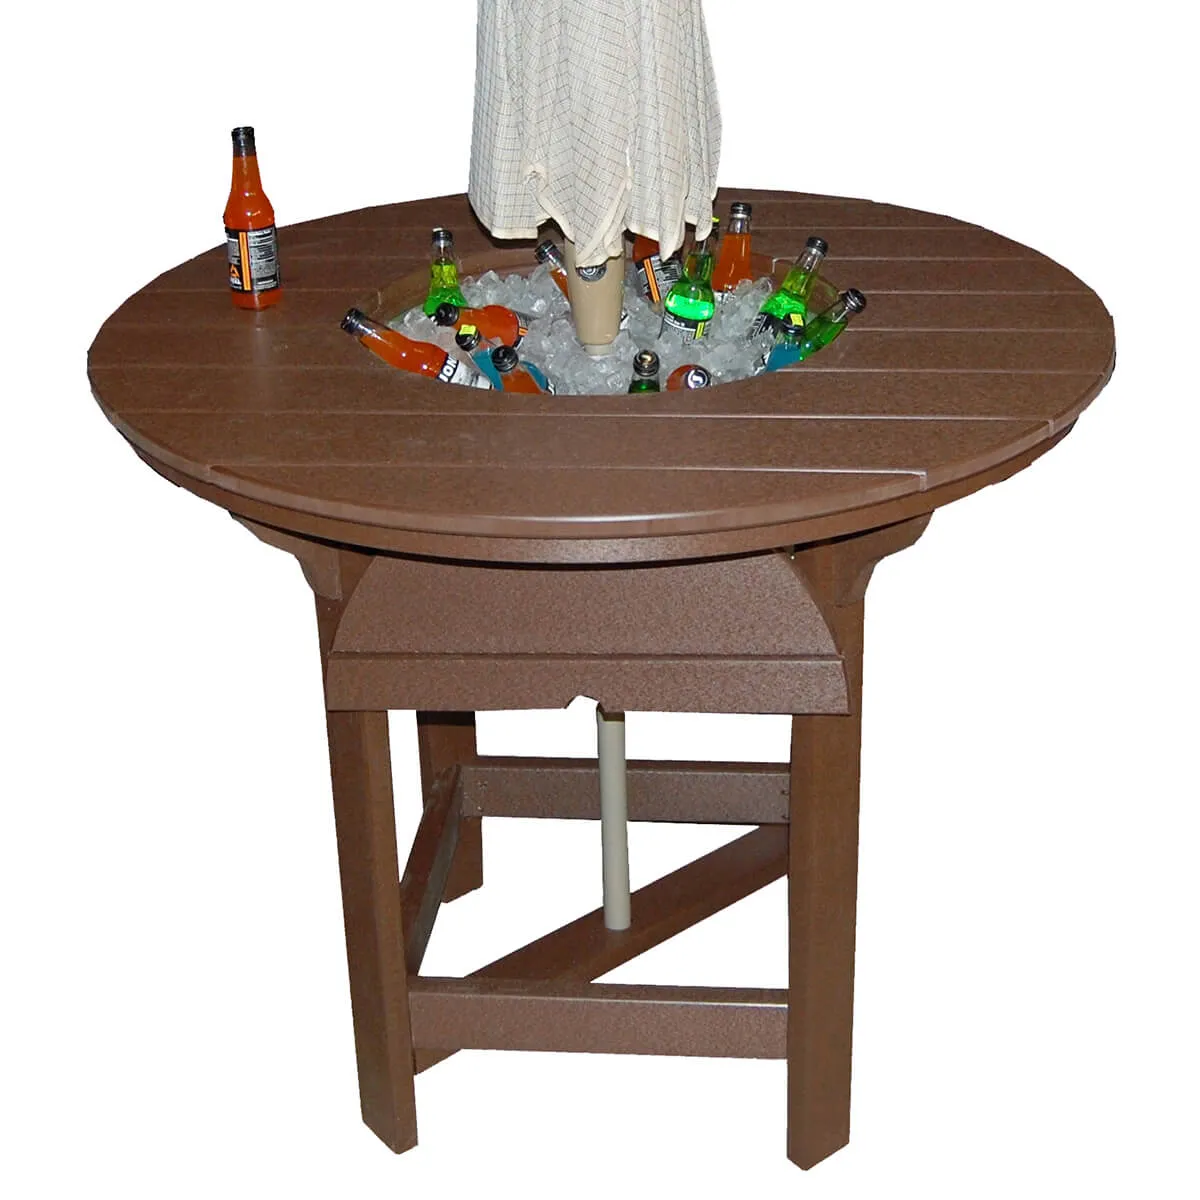 48 Inch Round Bar Table with Ice Bowl